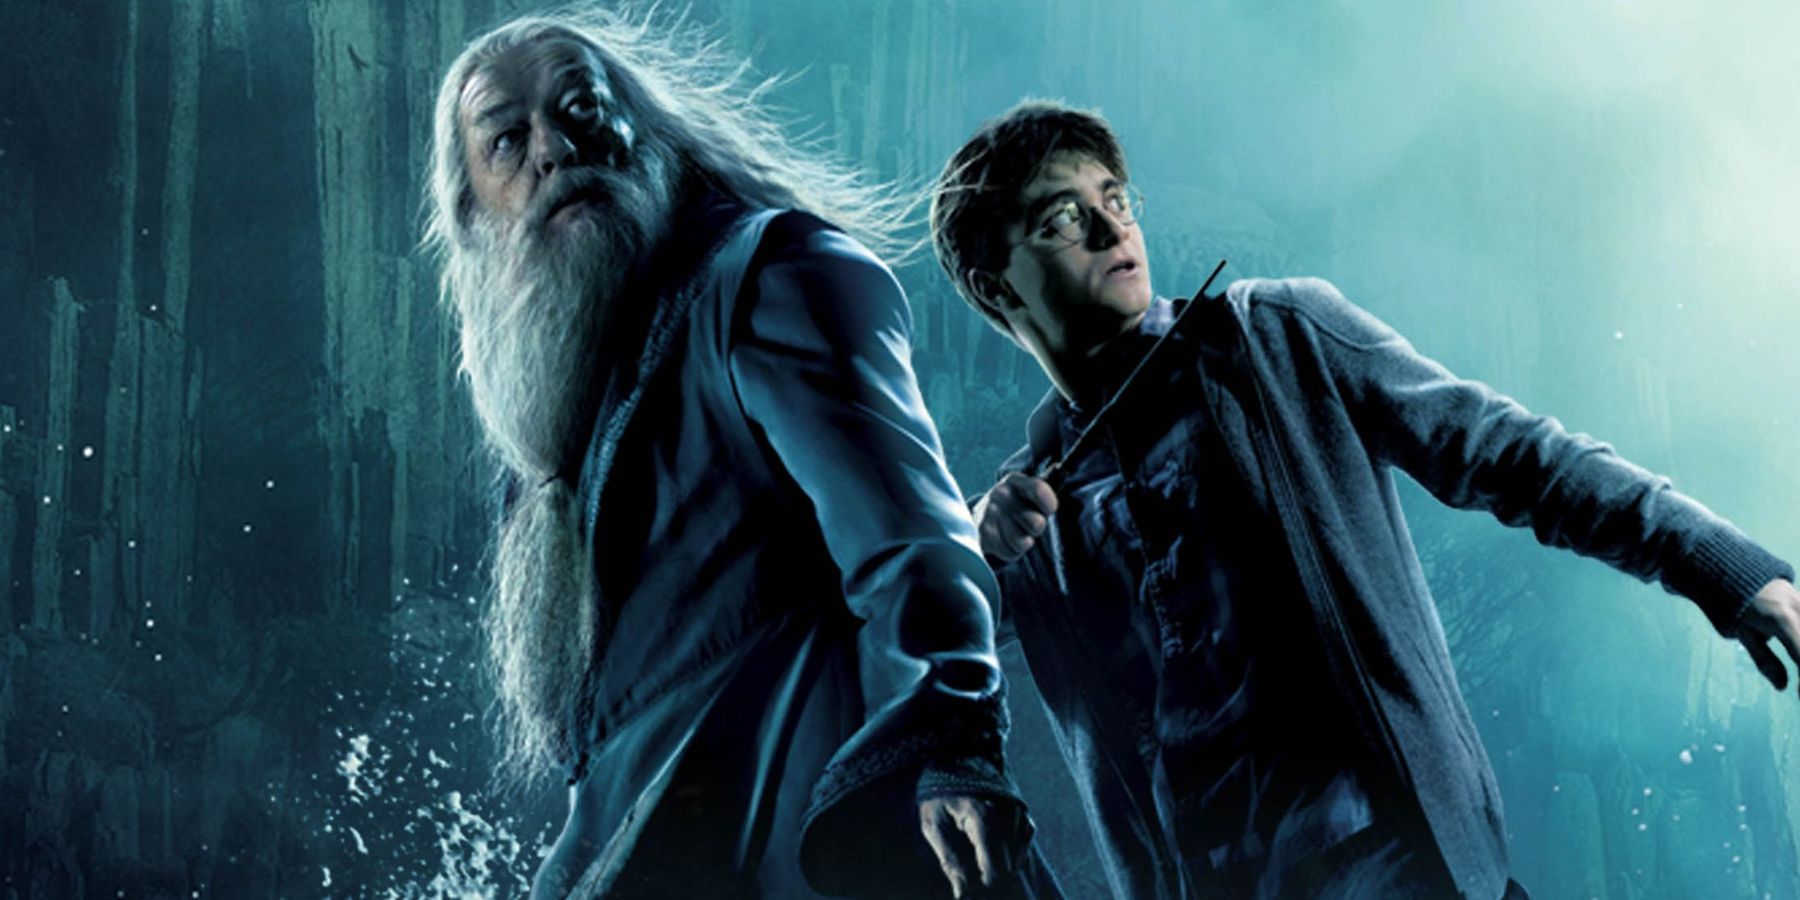 Harry Potter And The Half-Blood Prince movie dumbledore